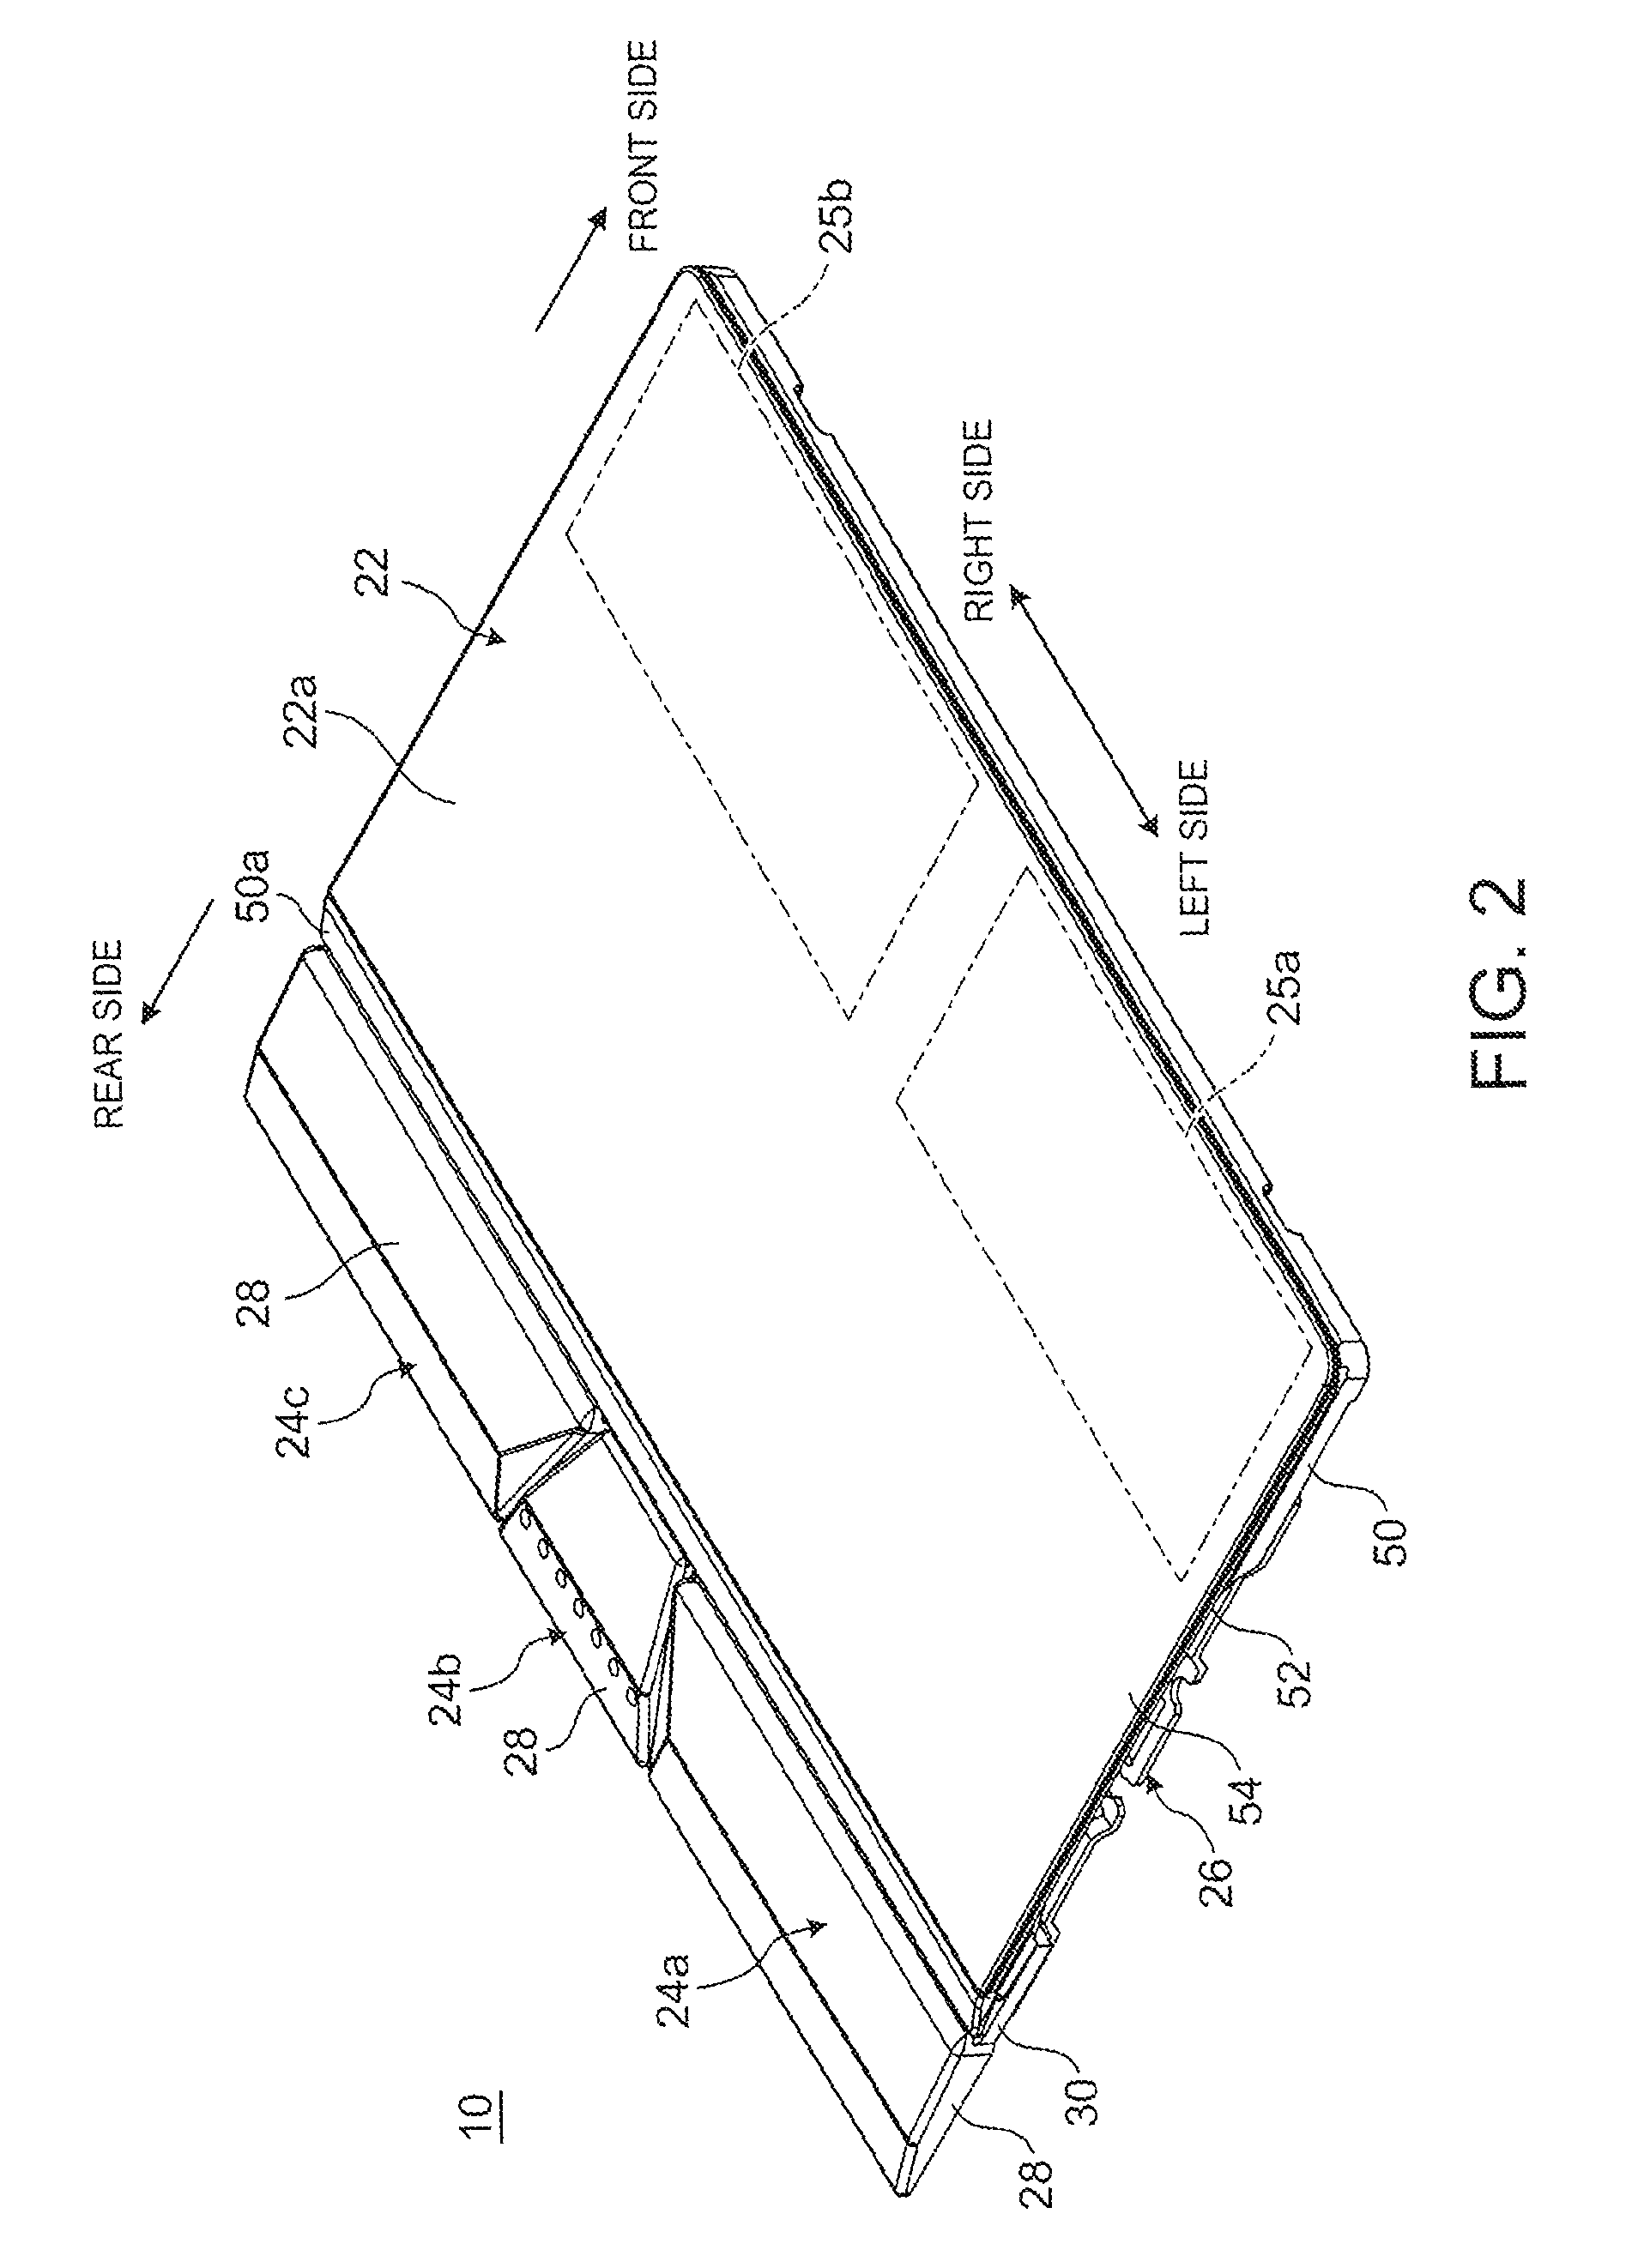 Coupling structure for input devices